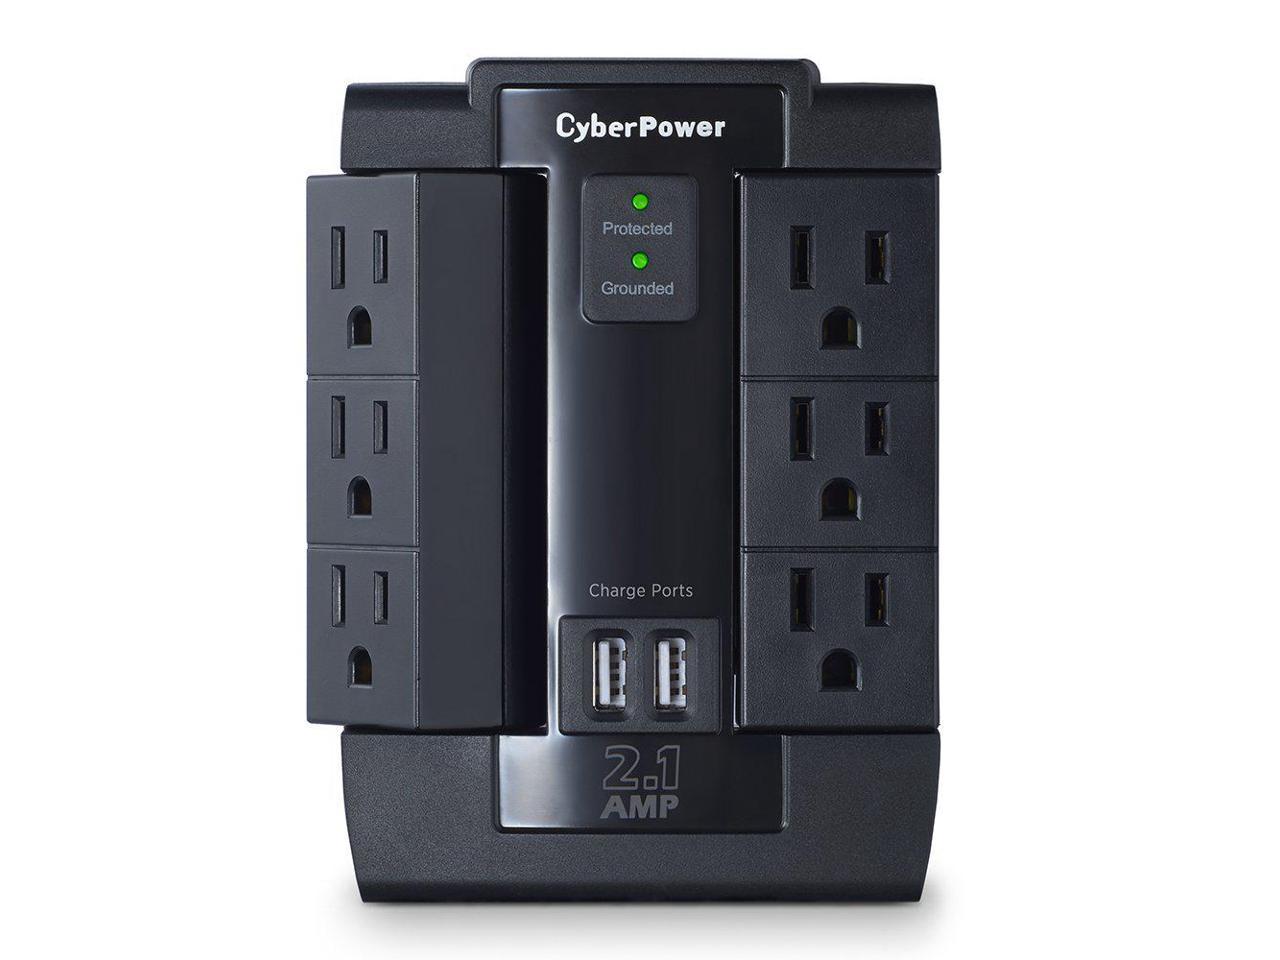 6-AC Swivel Outlets 1200J/125V CyberPower CSP600WSU Surge Protector 2 USB Tap 